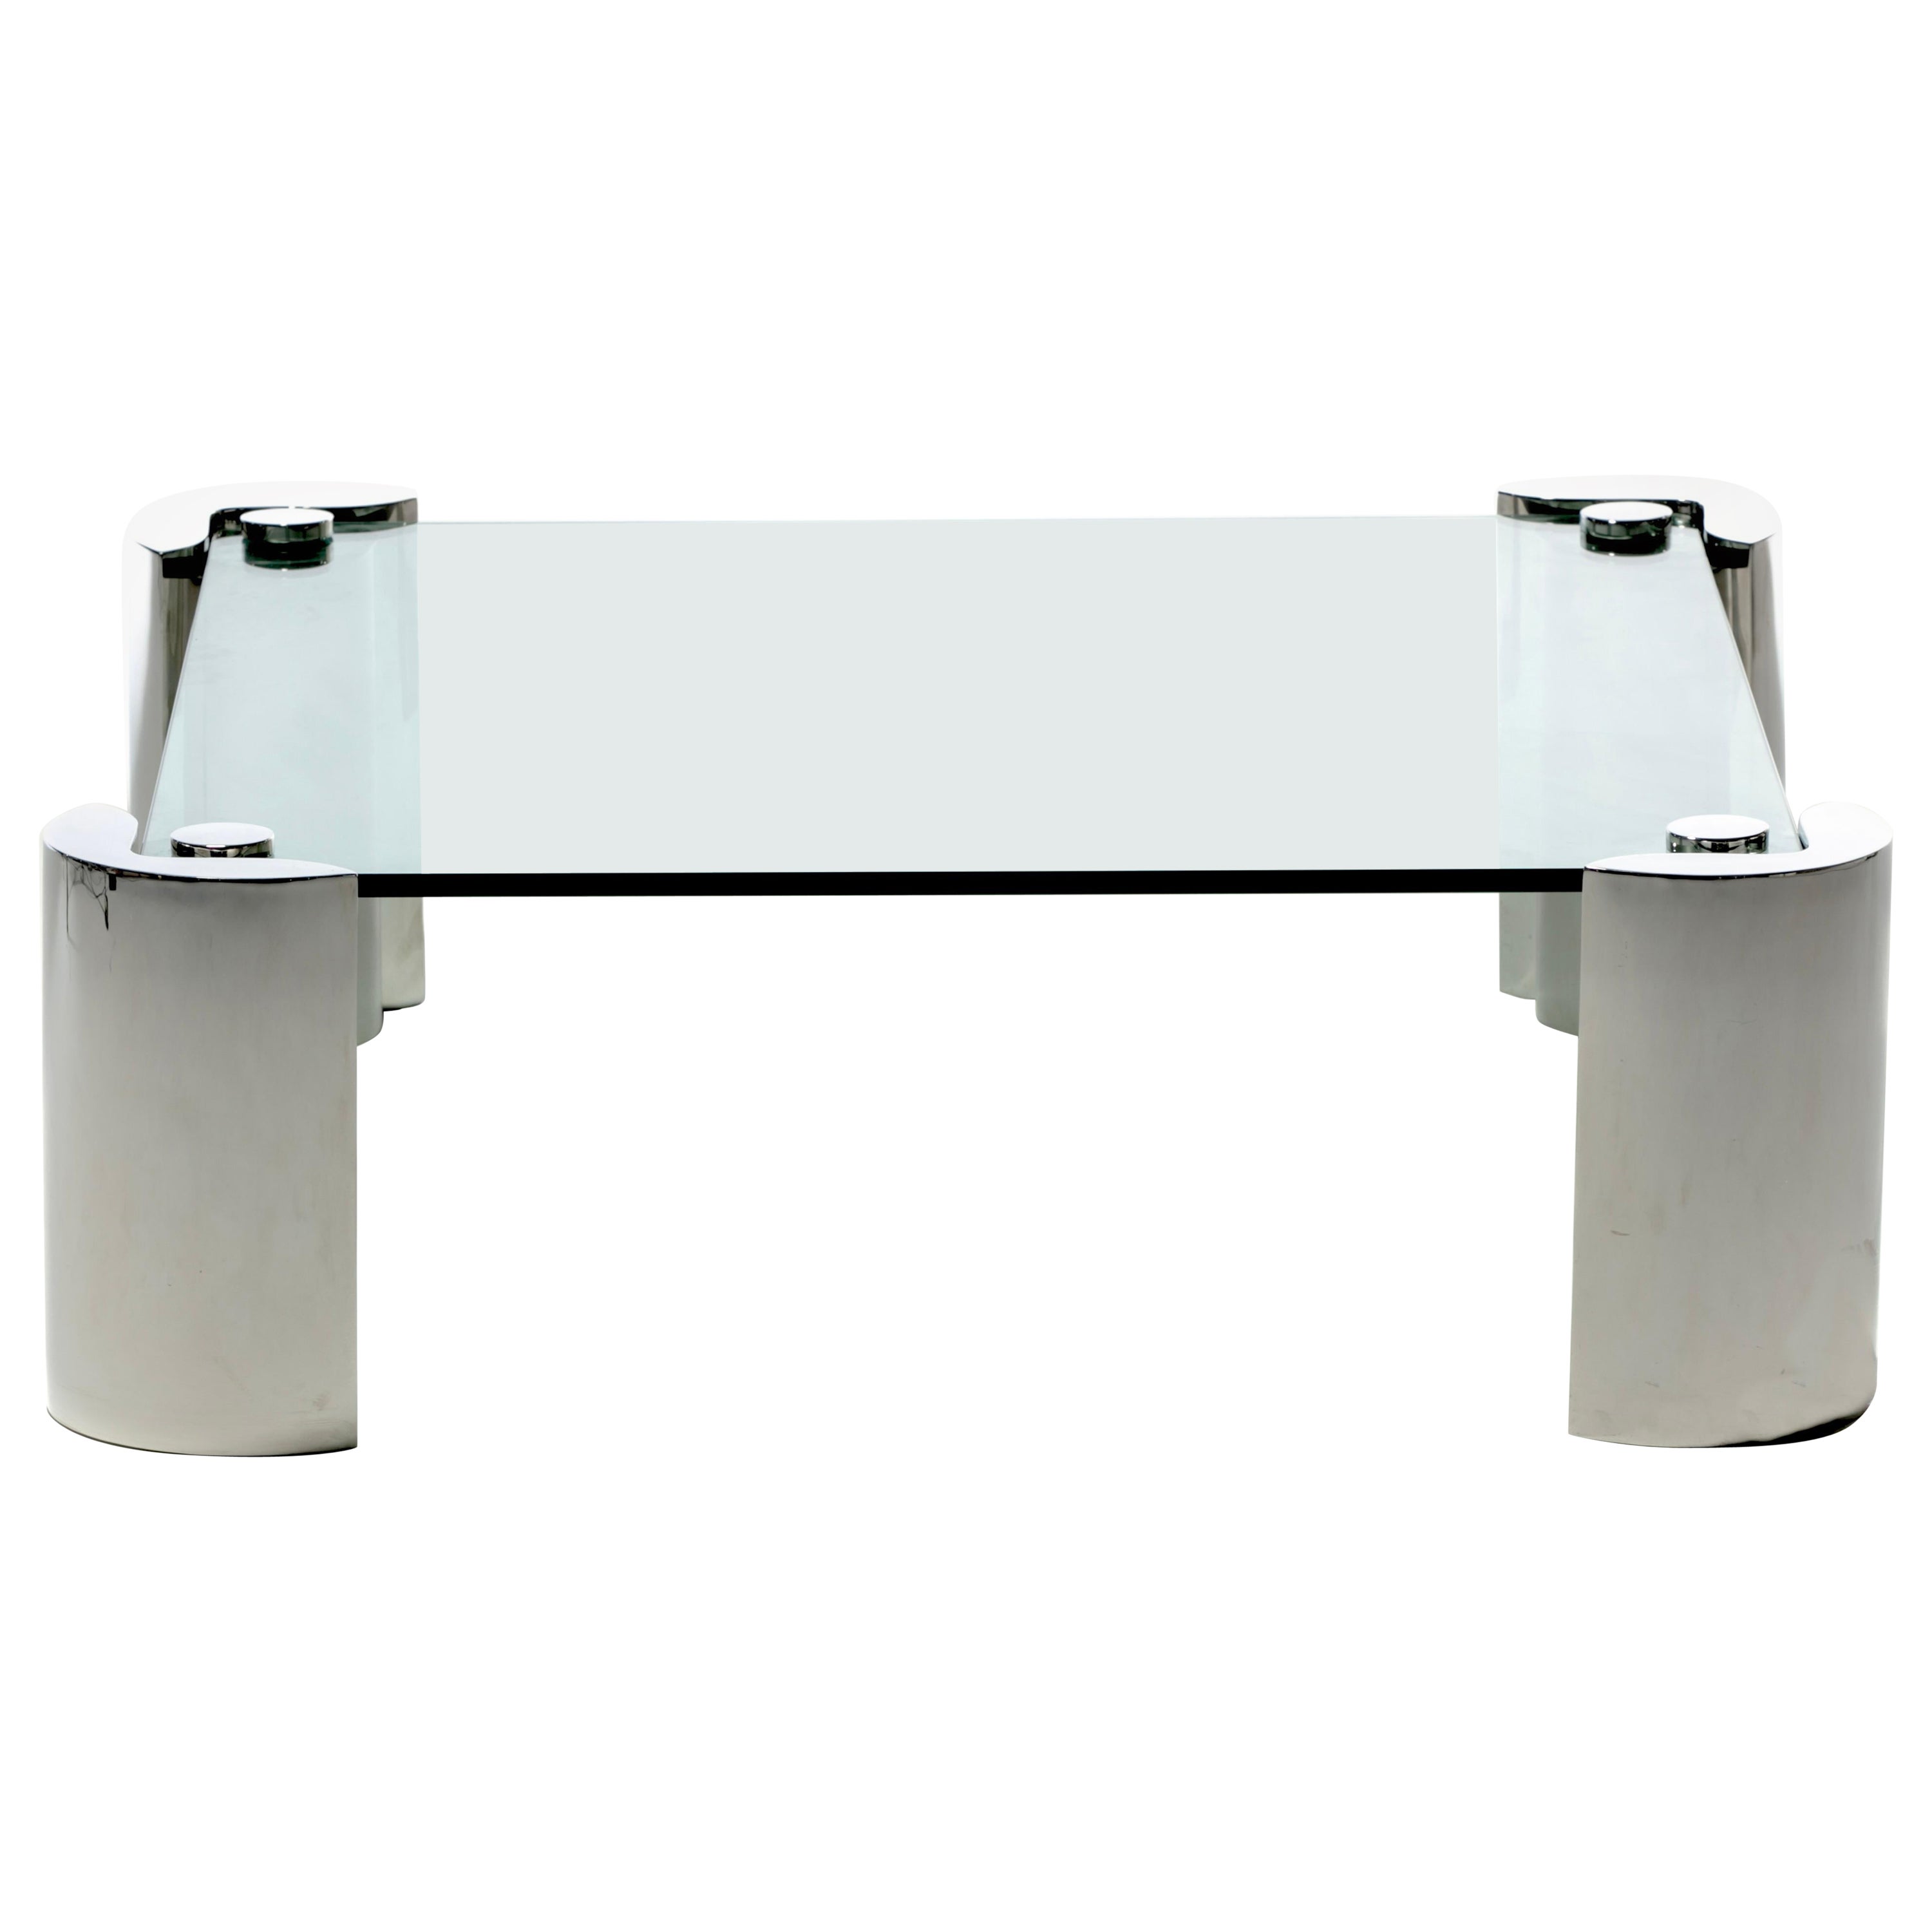 1980s Sculptural Karl Springer Coffee Table in Glass and Stainless Steel